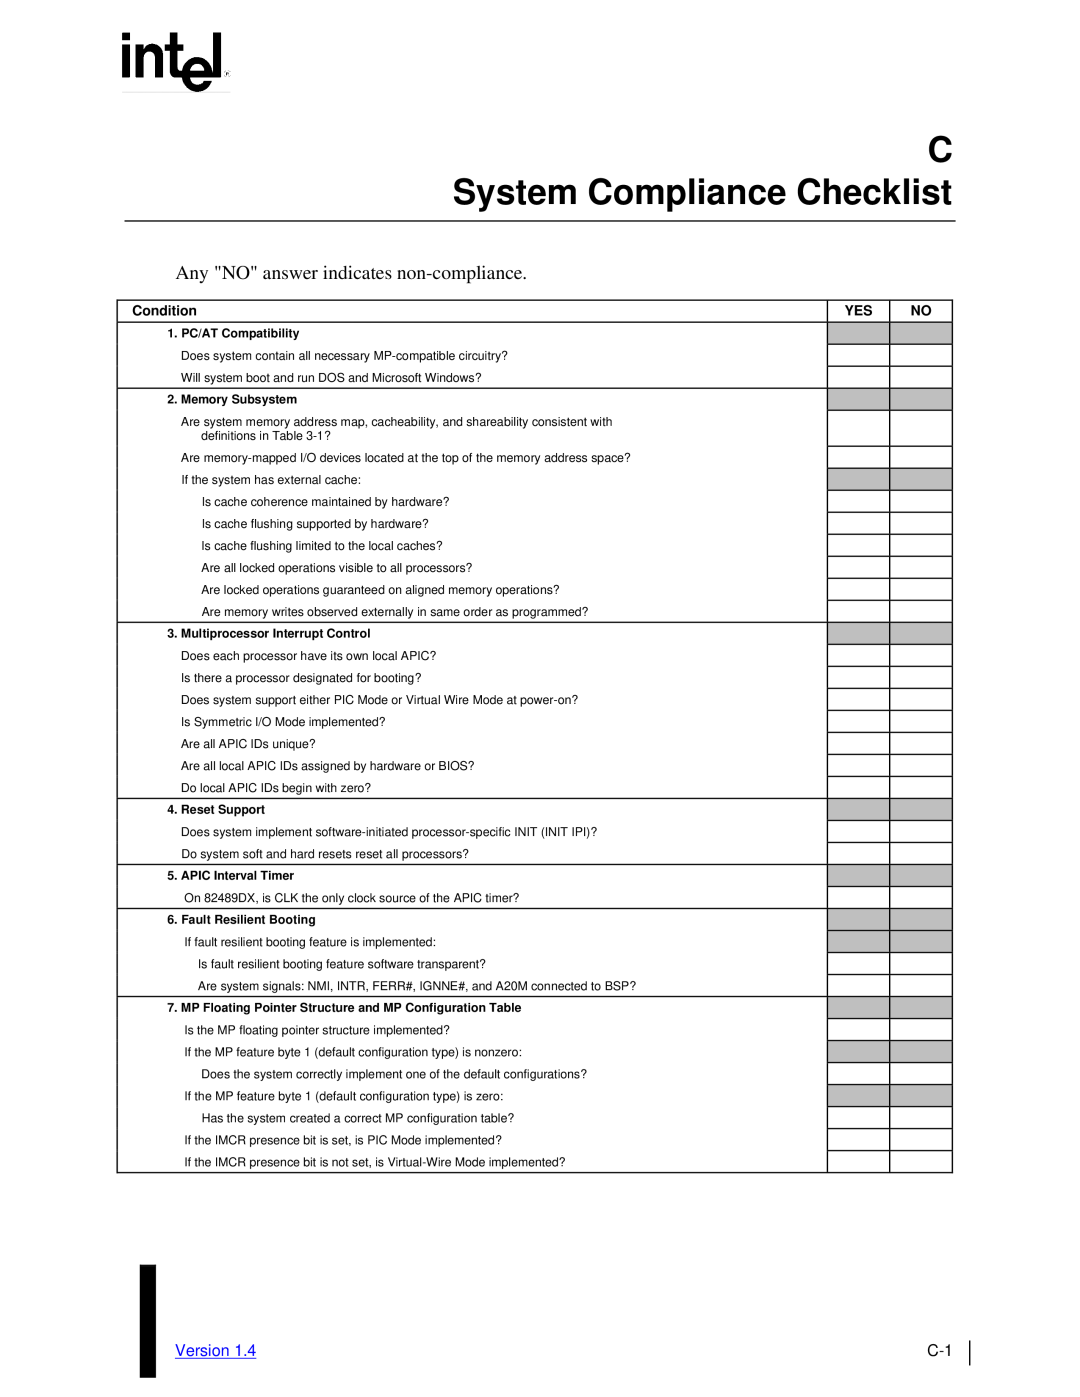 Intel MultiProcessor manual C System Compliance Checklist, Any NO answer indicates non-compliance, Condition 